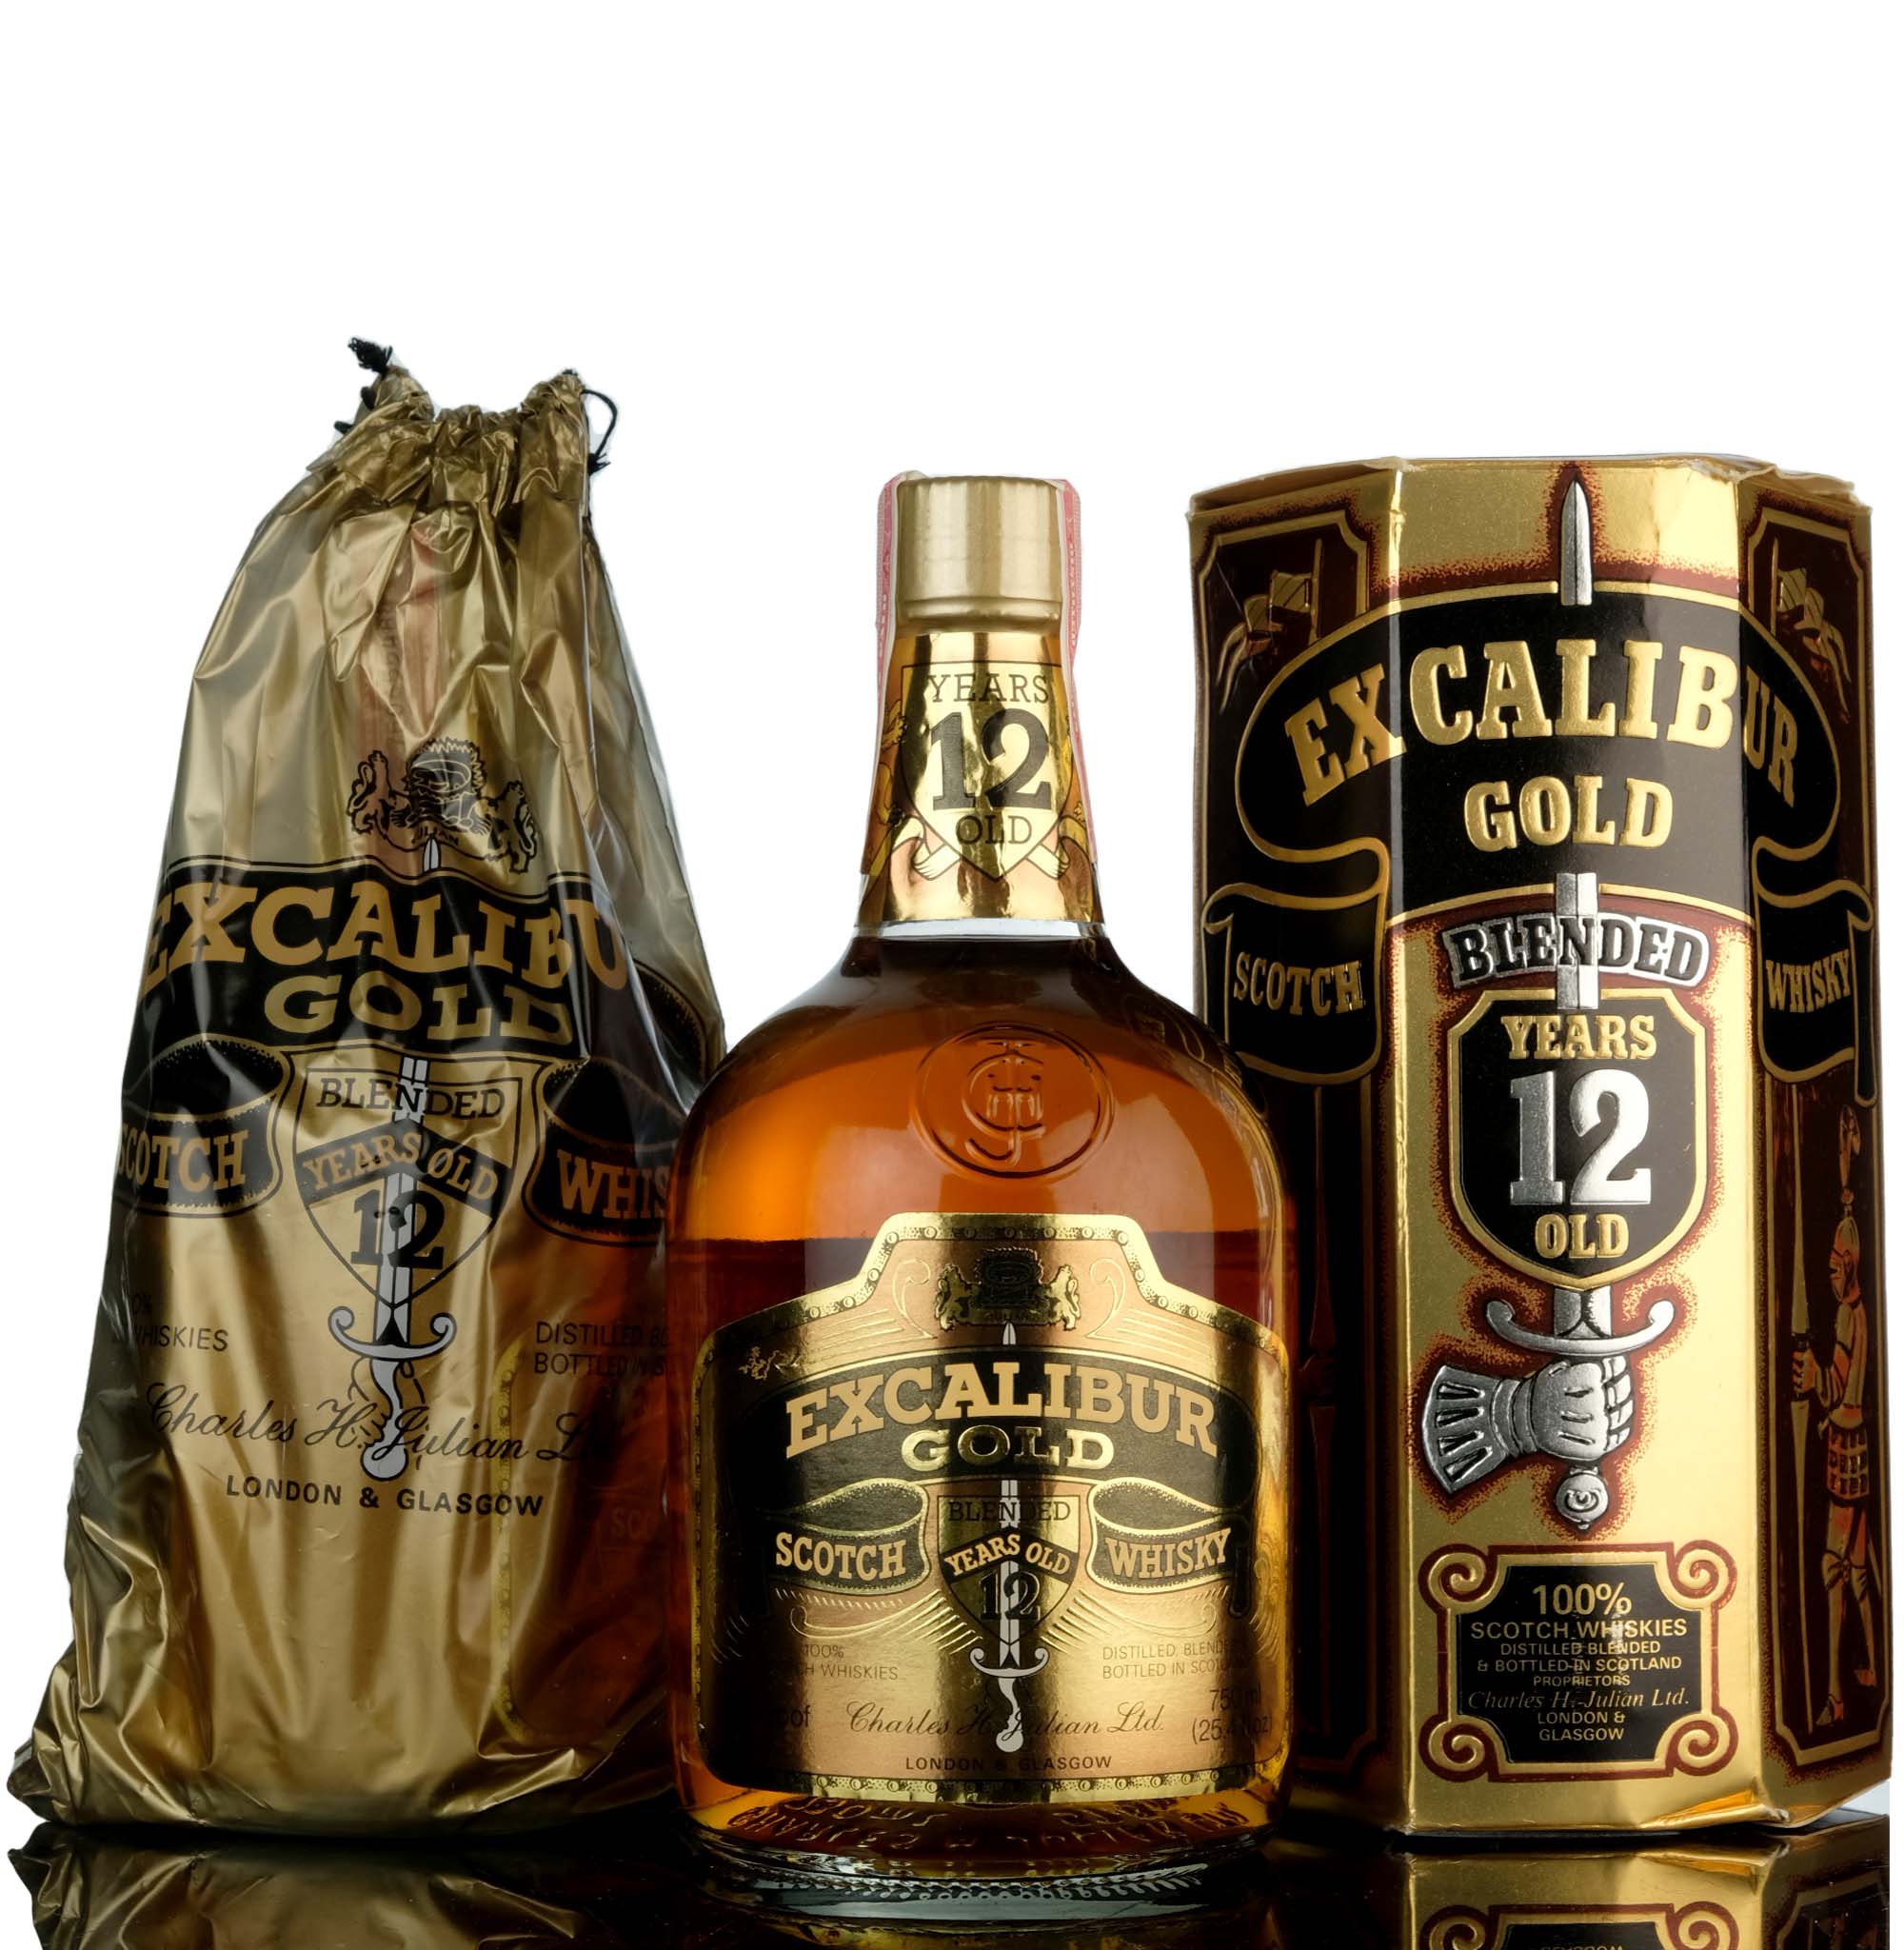 Excalibur Gold 12 Year Old - 1983 Release